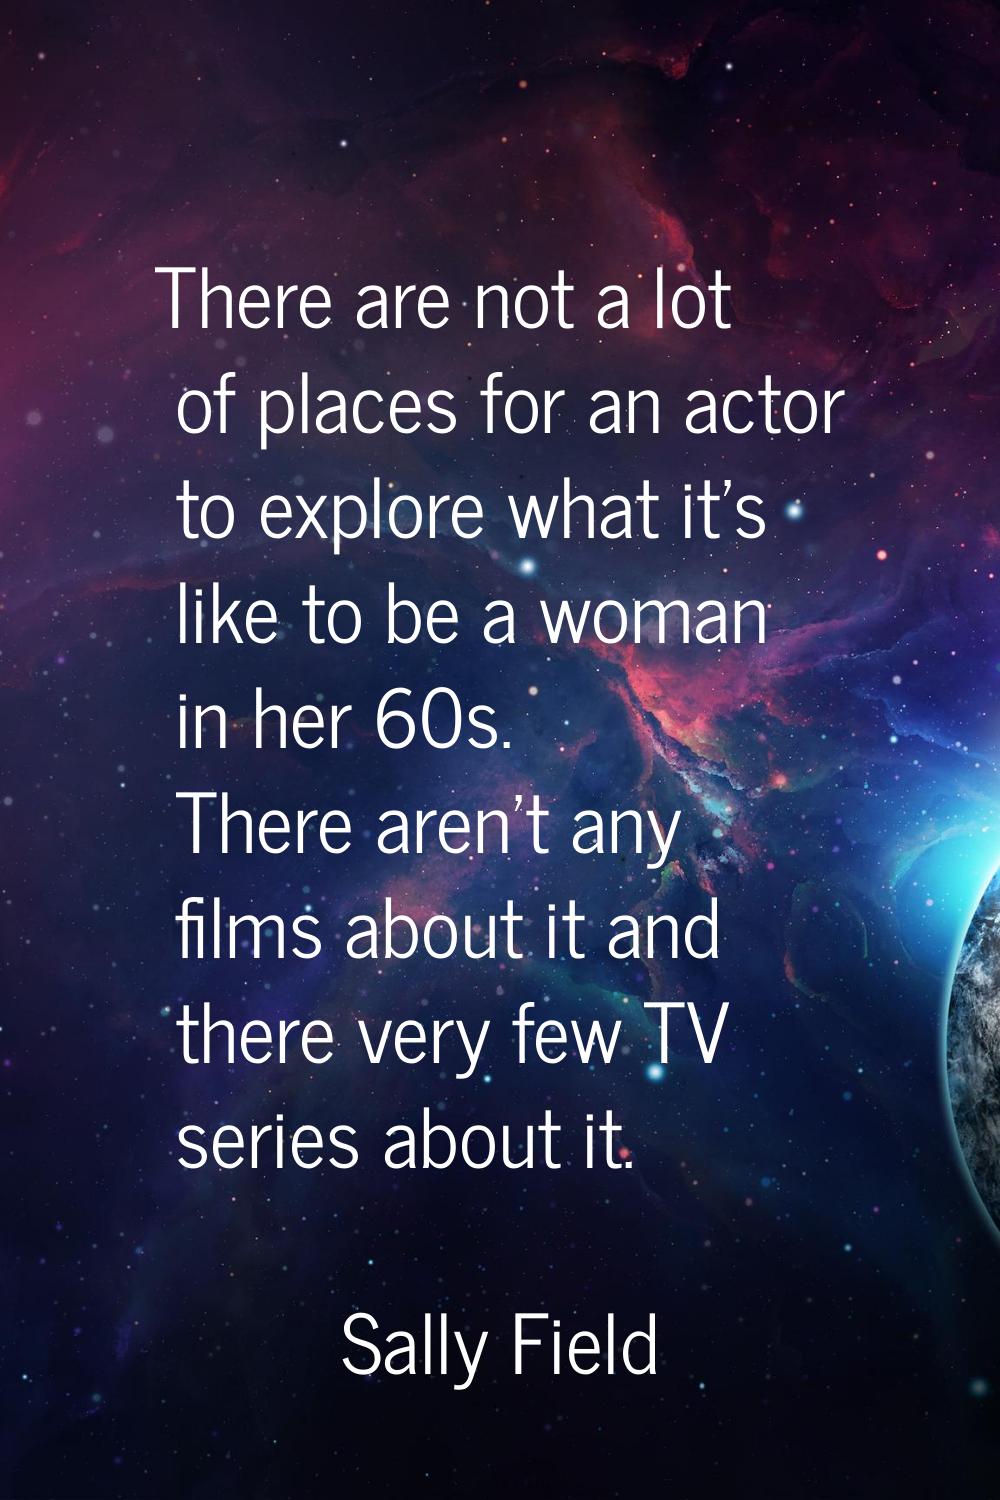 There are not a lot of places for an actor to explore what it's like to be a woman in her 60s. Ther